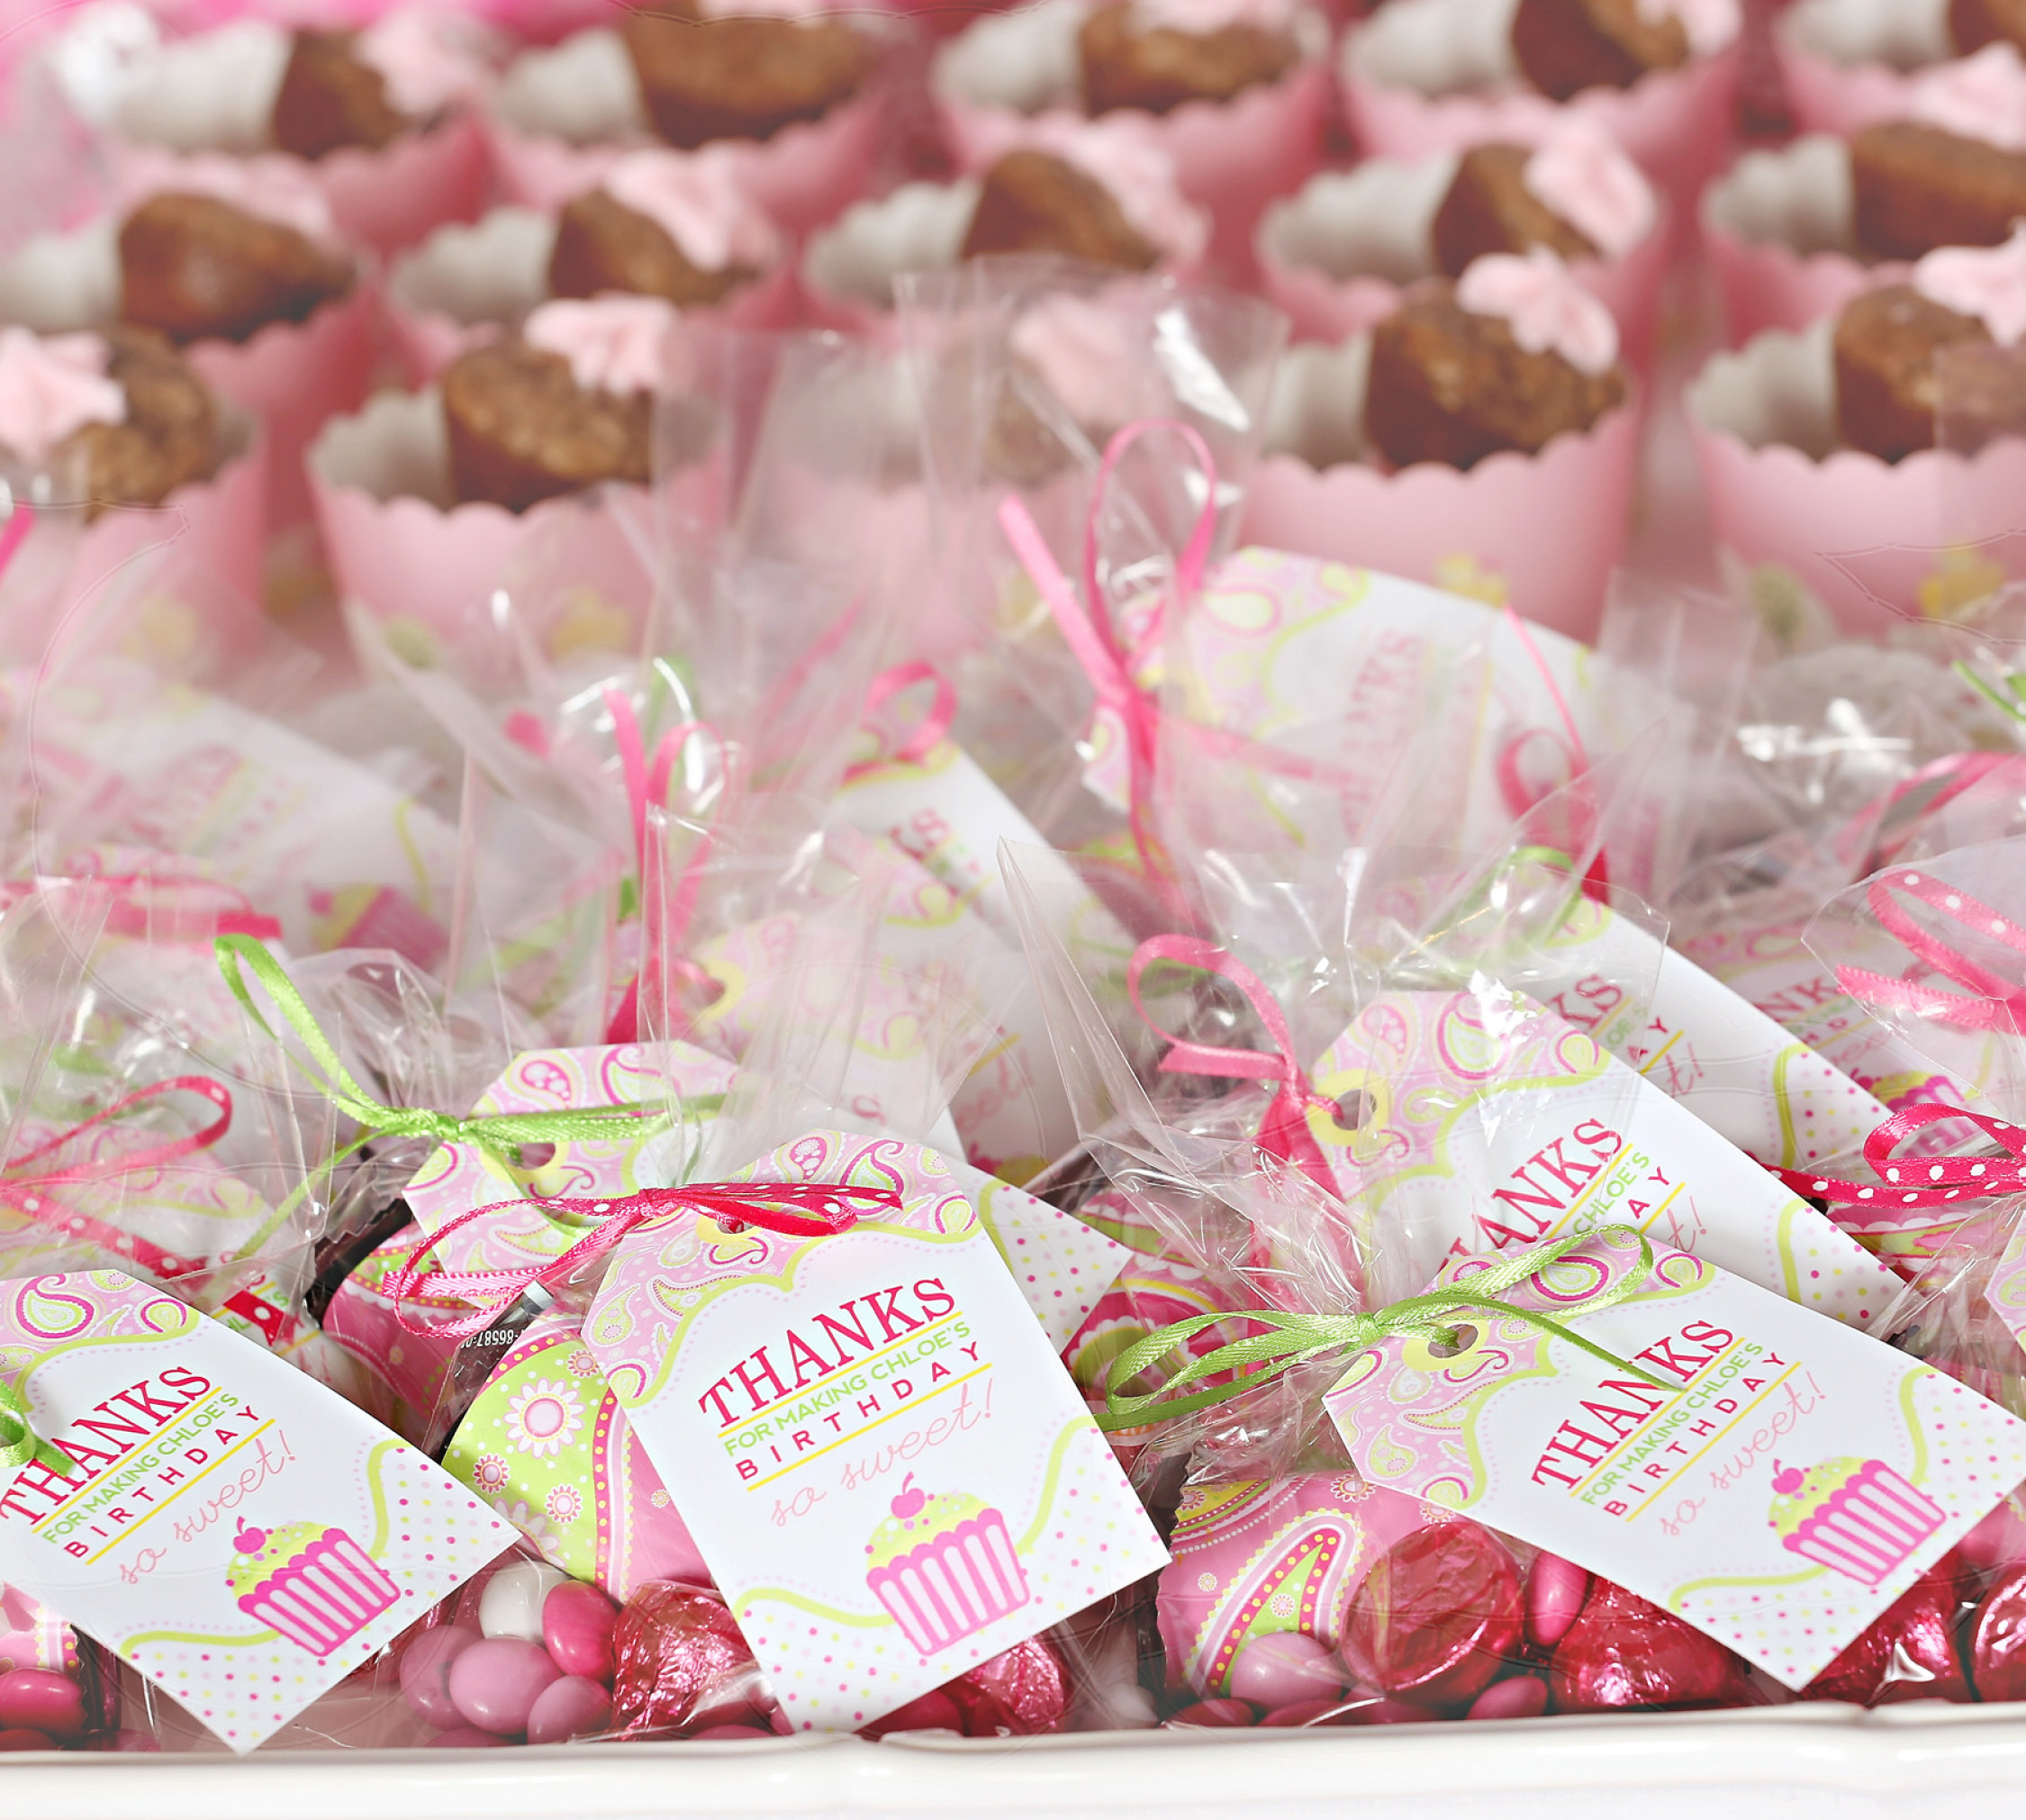 1St Birthday Party Favor Ideas
 A Cupcake Themed 1st Birthday party with Paisley and Polka